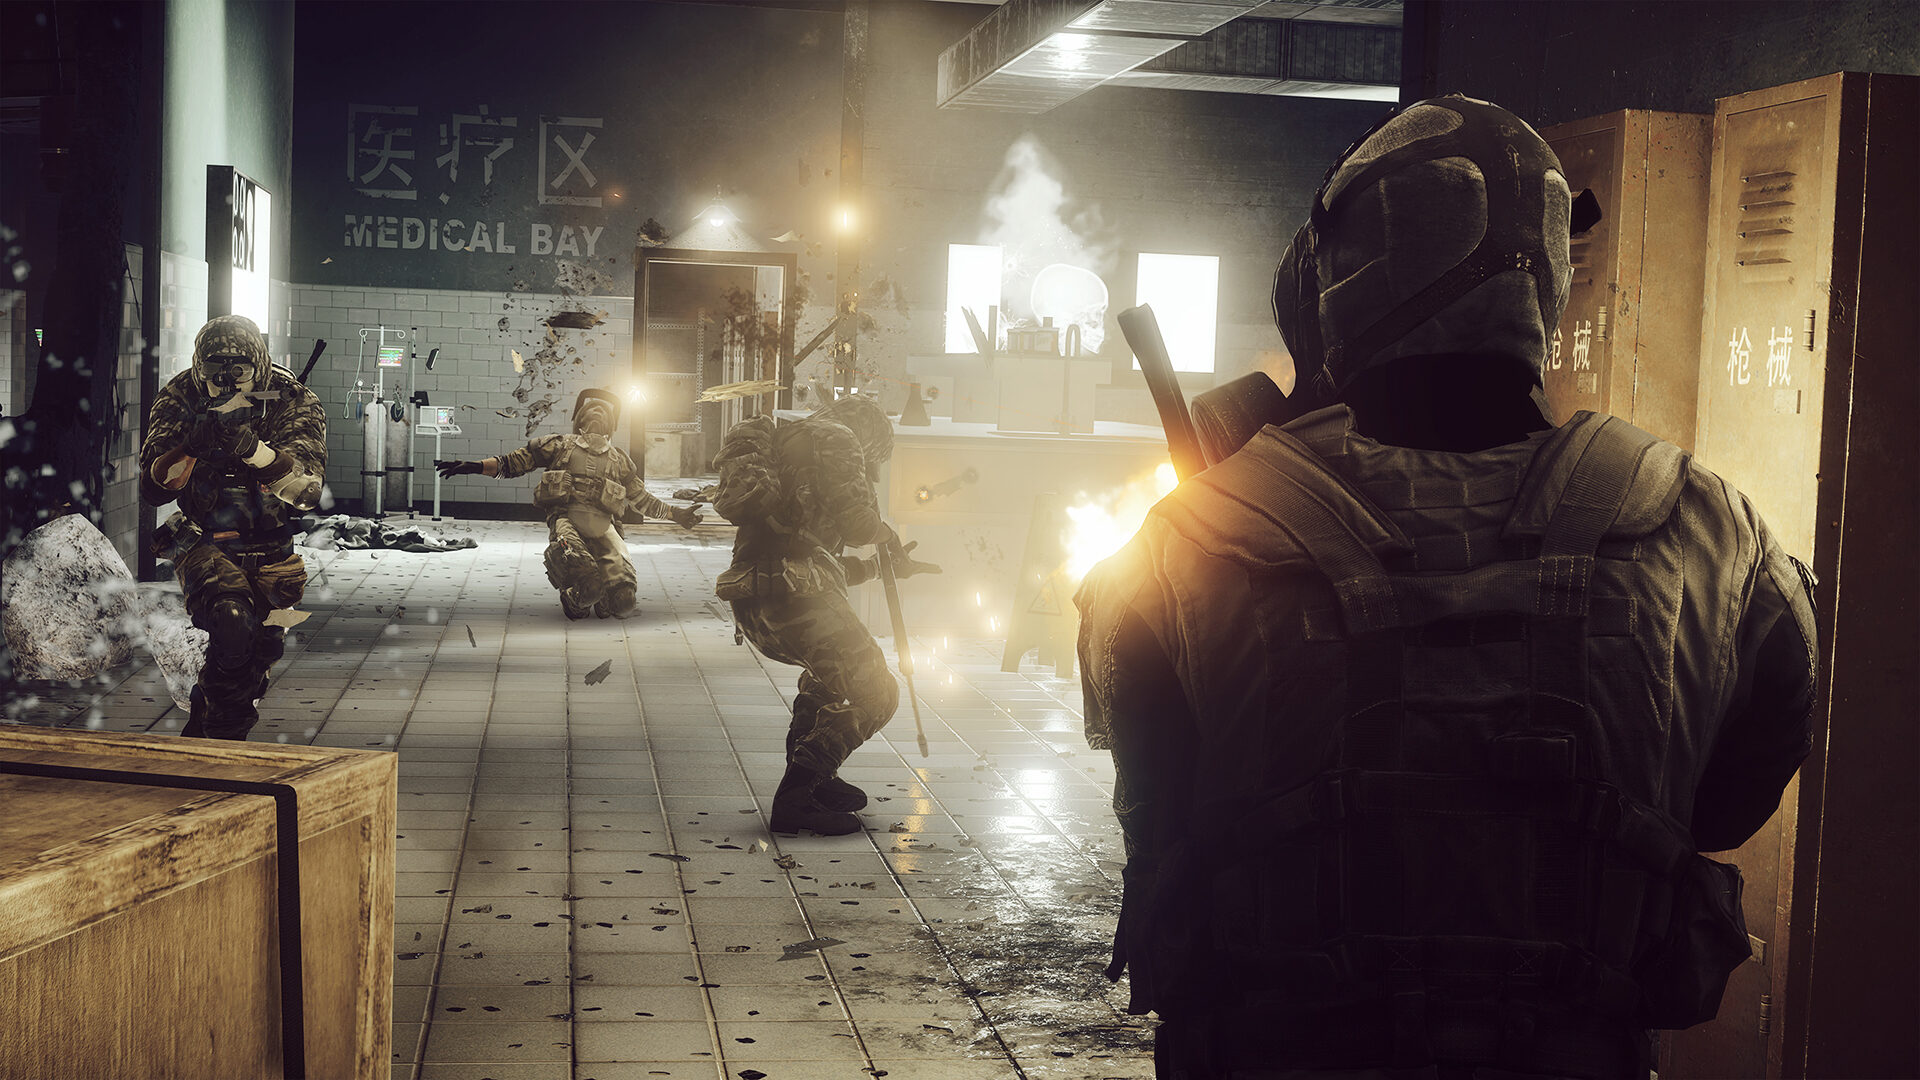 Buy Battlefield 4 Premium Edition and download